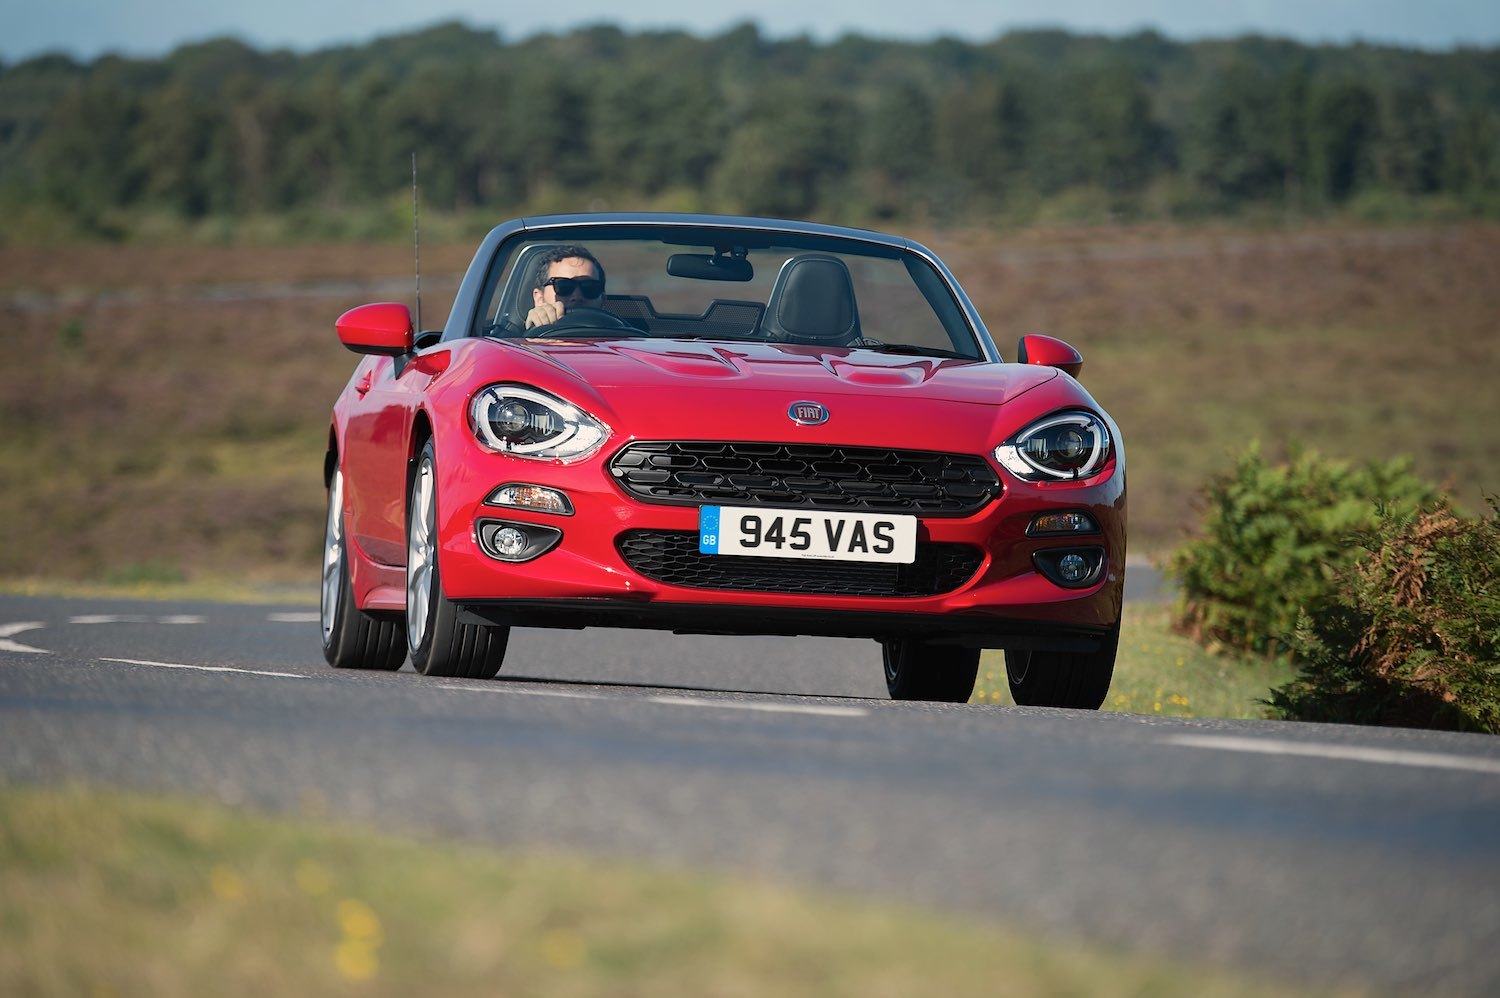 Tom Scanlan reviews the Fiat 124 Spider for Drive 4